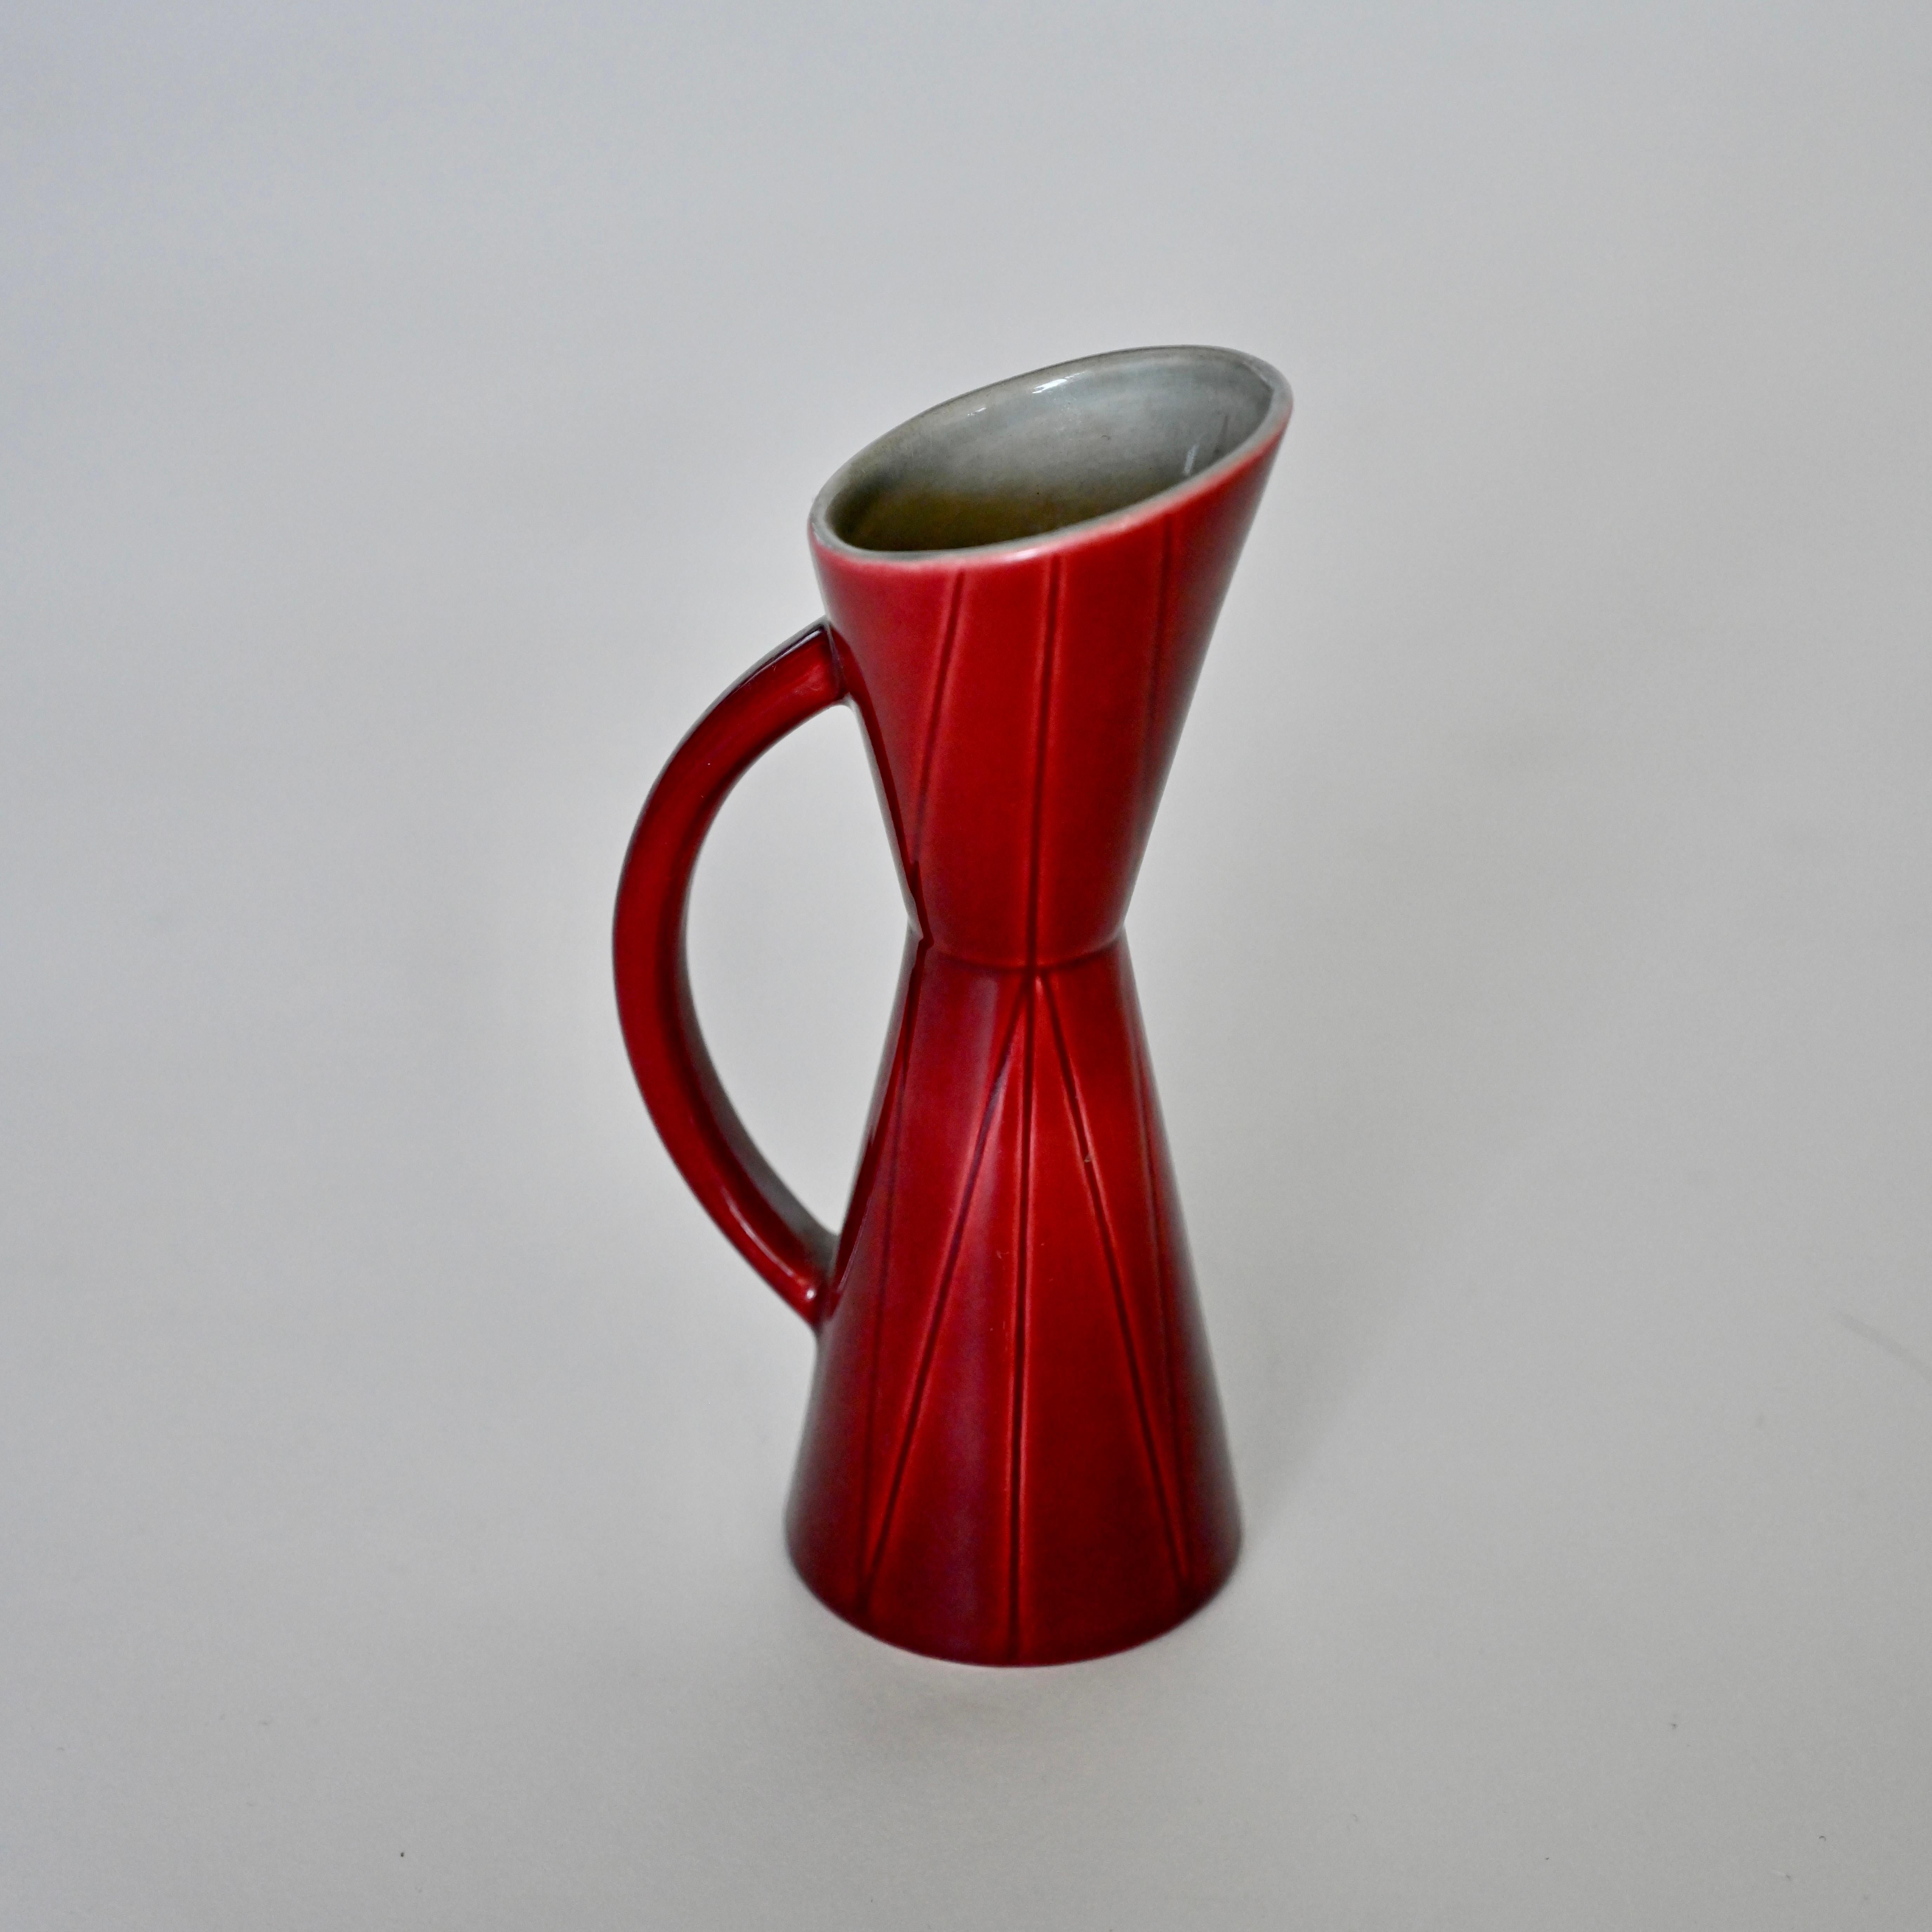 Beautiful pitcher / vase with rich red glaze. Marked Rörstrand at base. Sweden, Mid 20th Century.